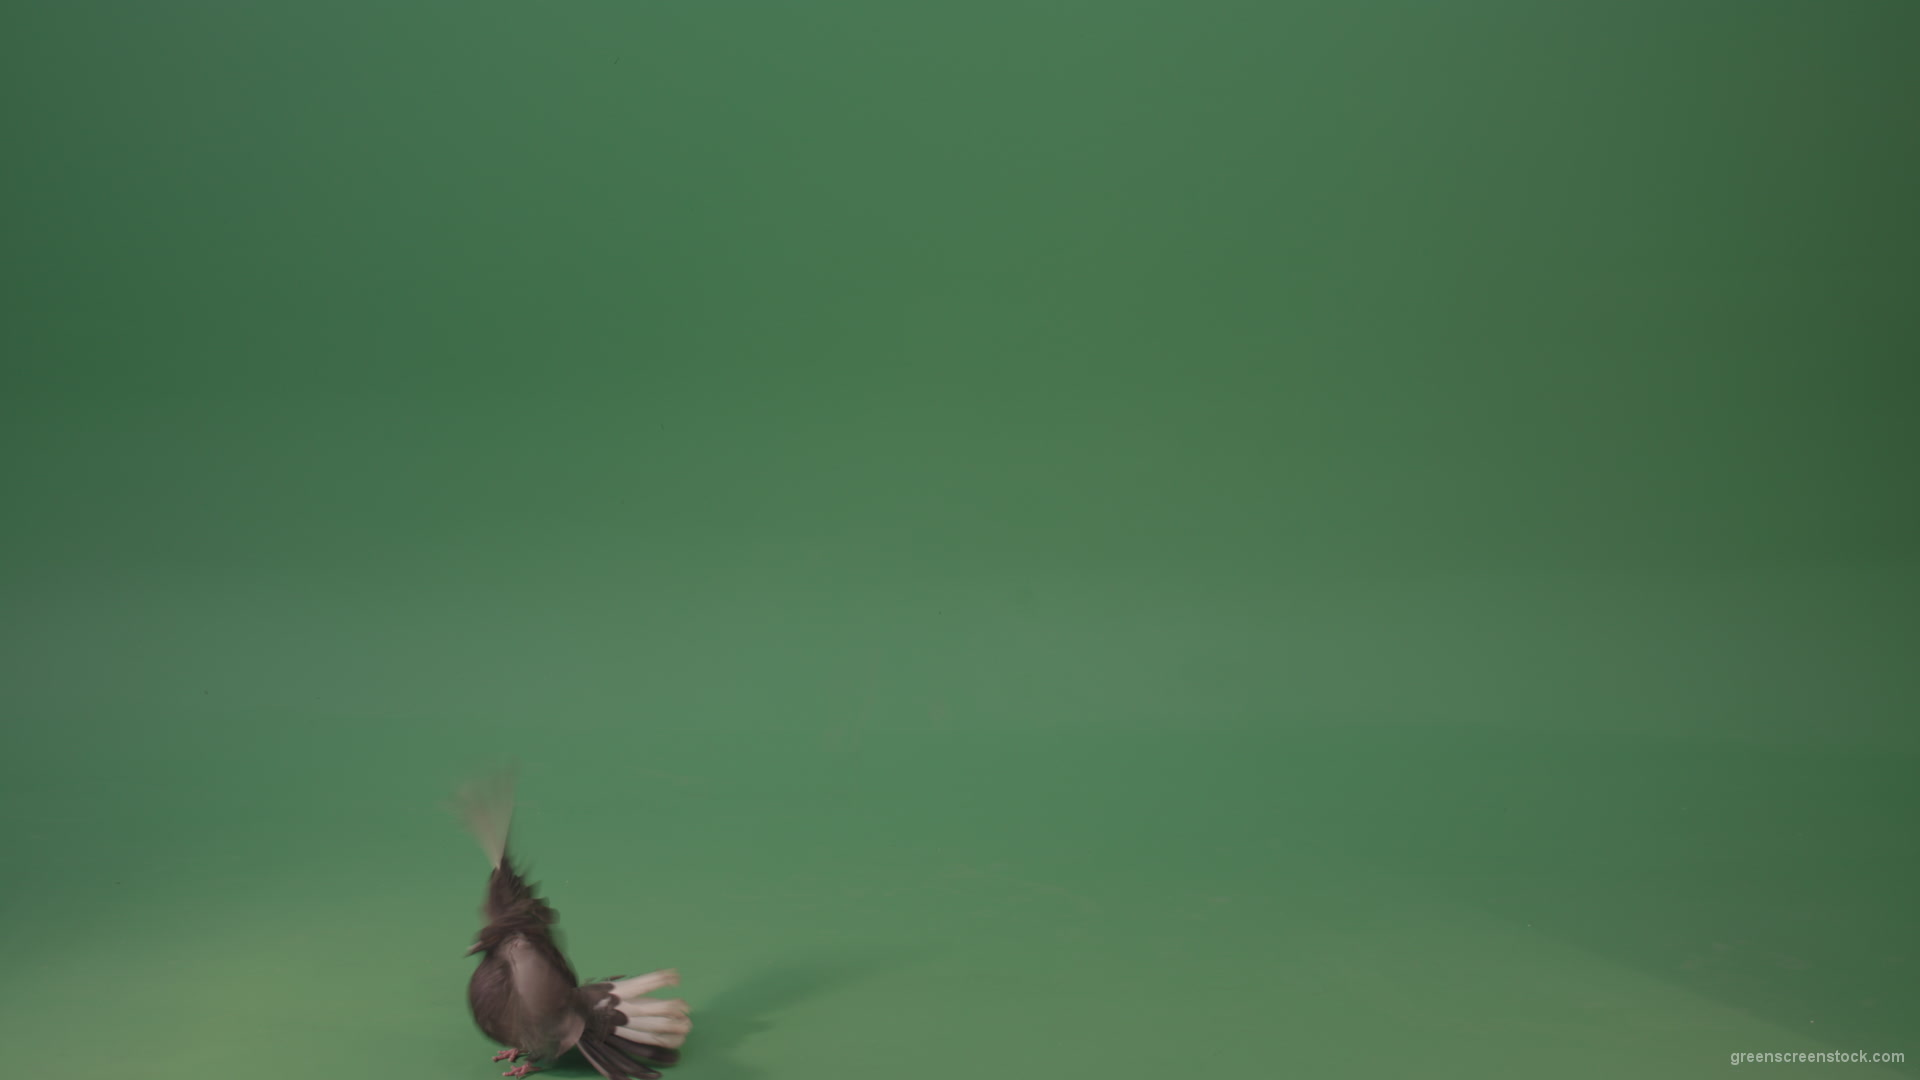 Dove-bird-flies-and-descends-to-the-ground-isolated-on-green-background_007 Green Screen Stock